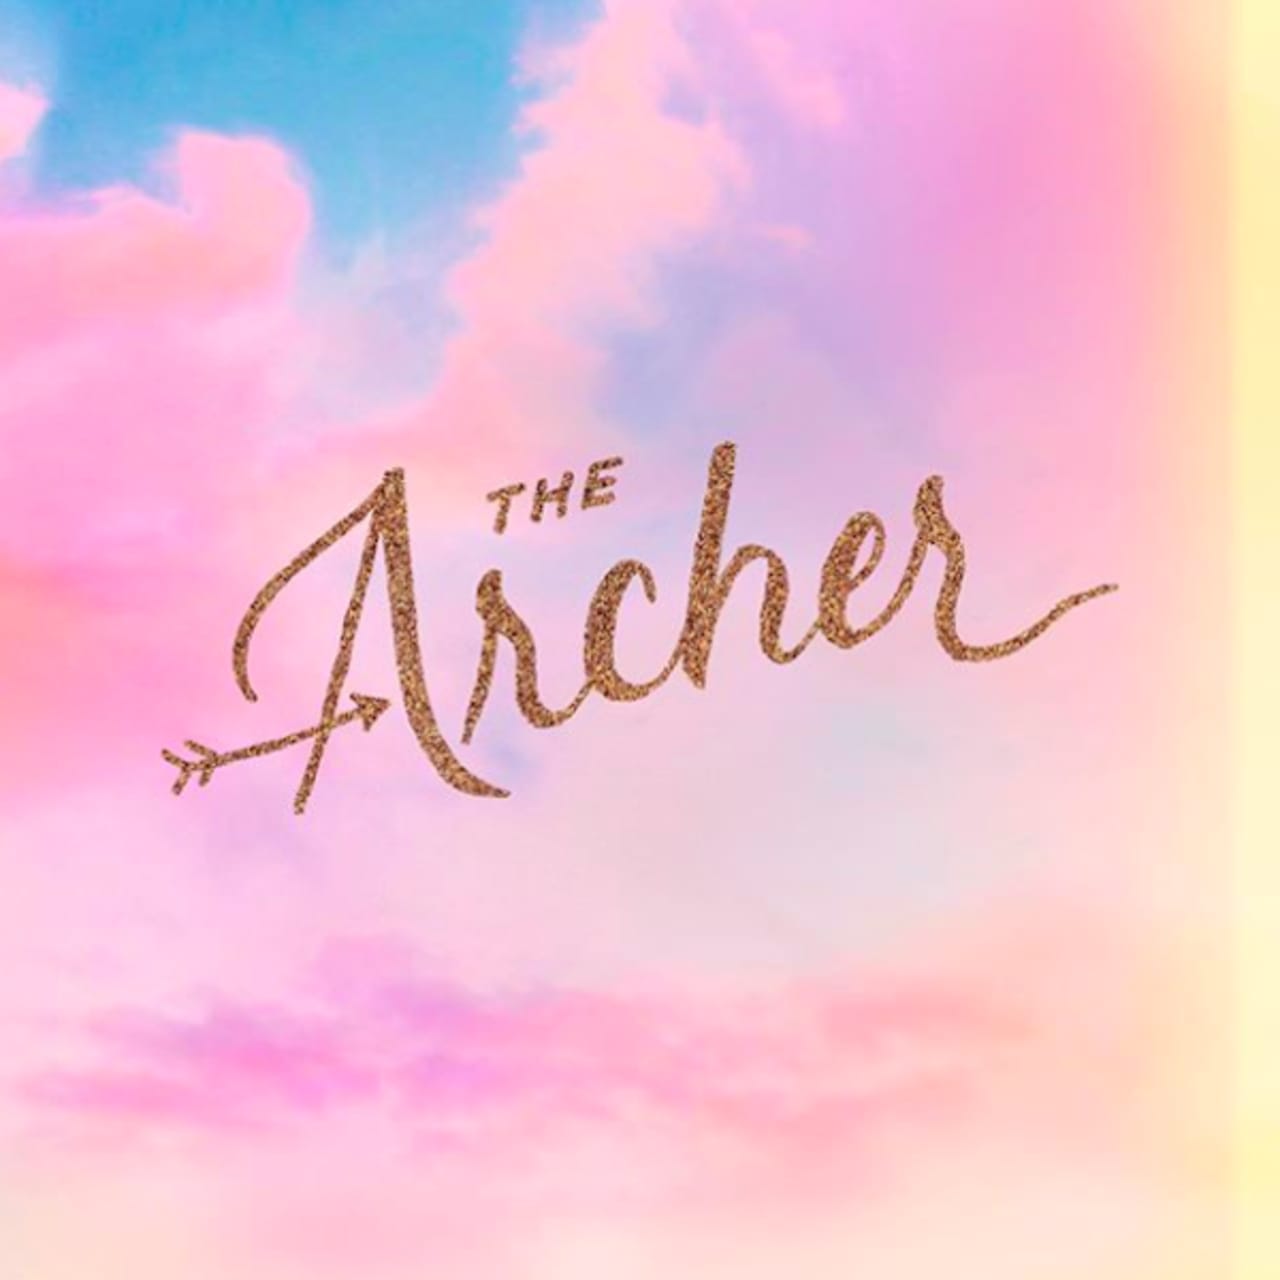 Image result for the archer taylor swift single cover